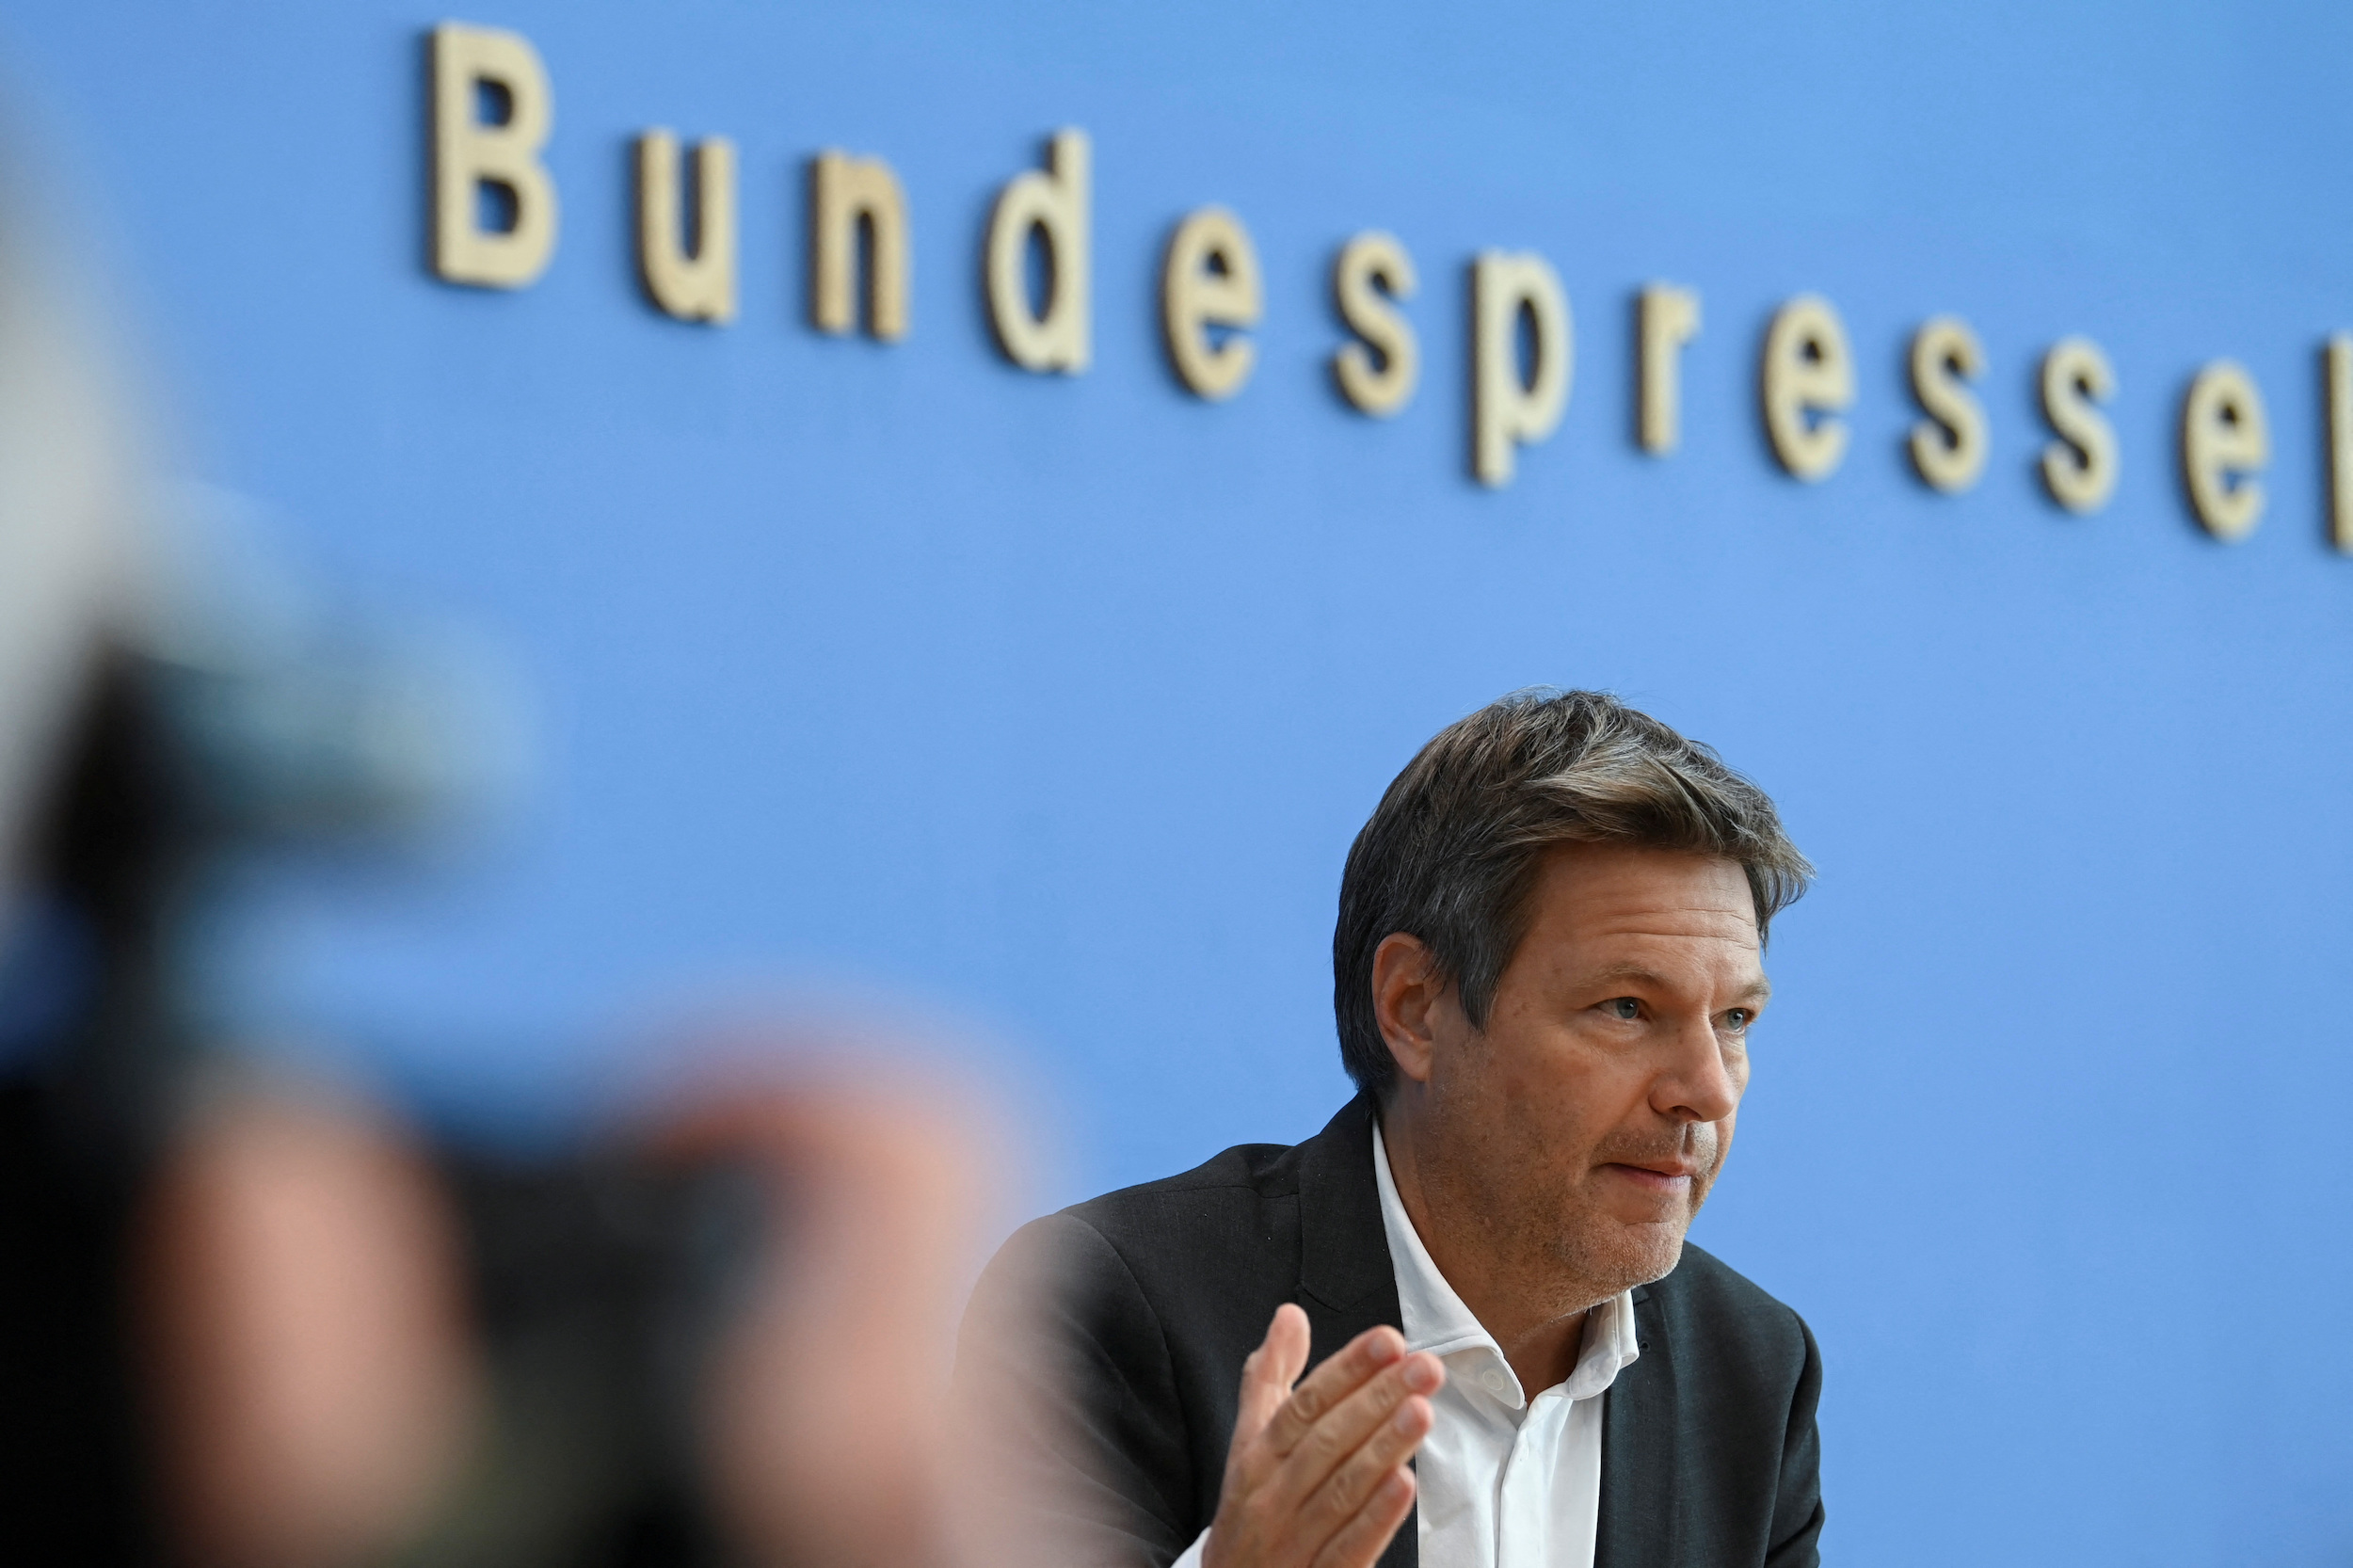 German Economy and Climate Minister Robert Habeck speaks at a news conference in Berlin on October 12.